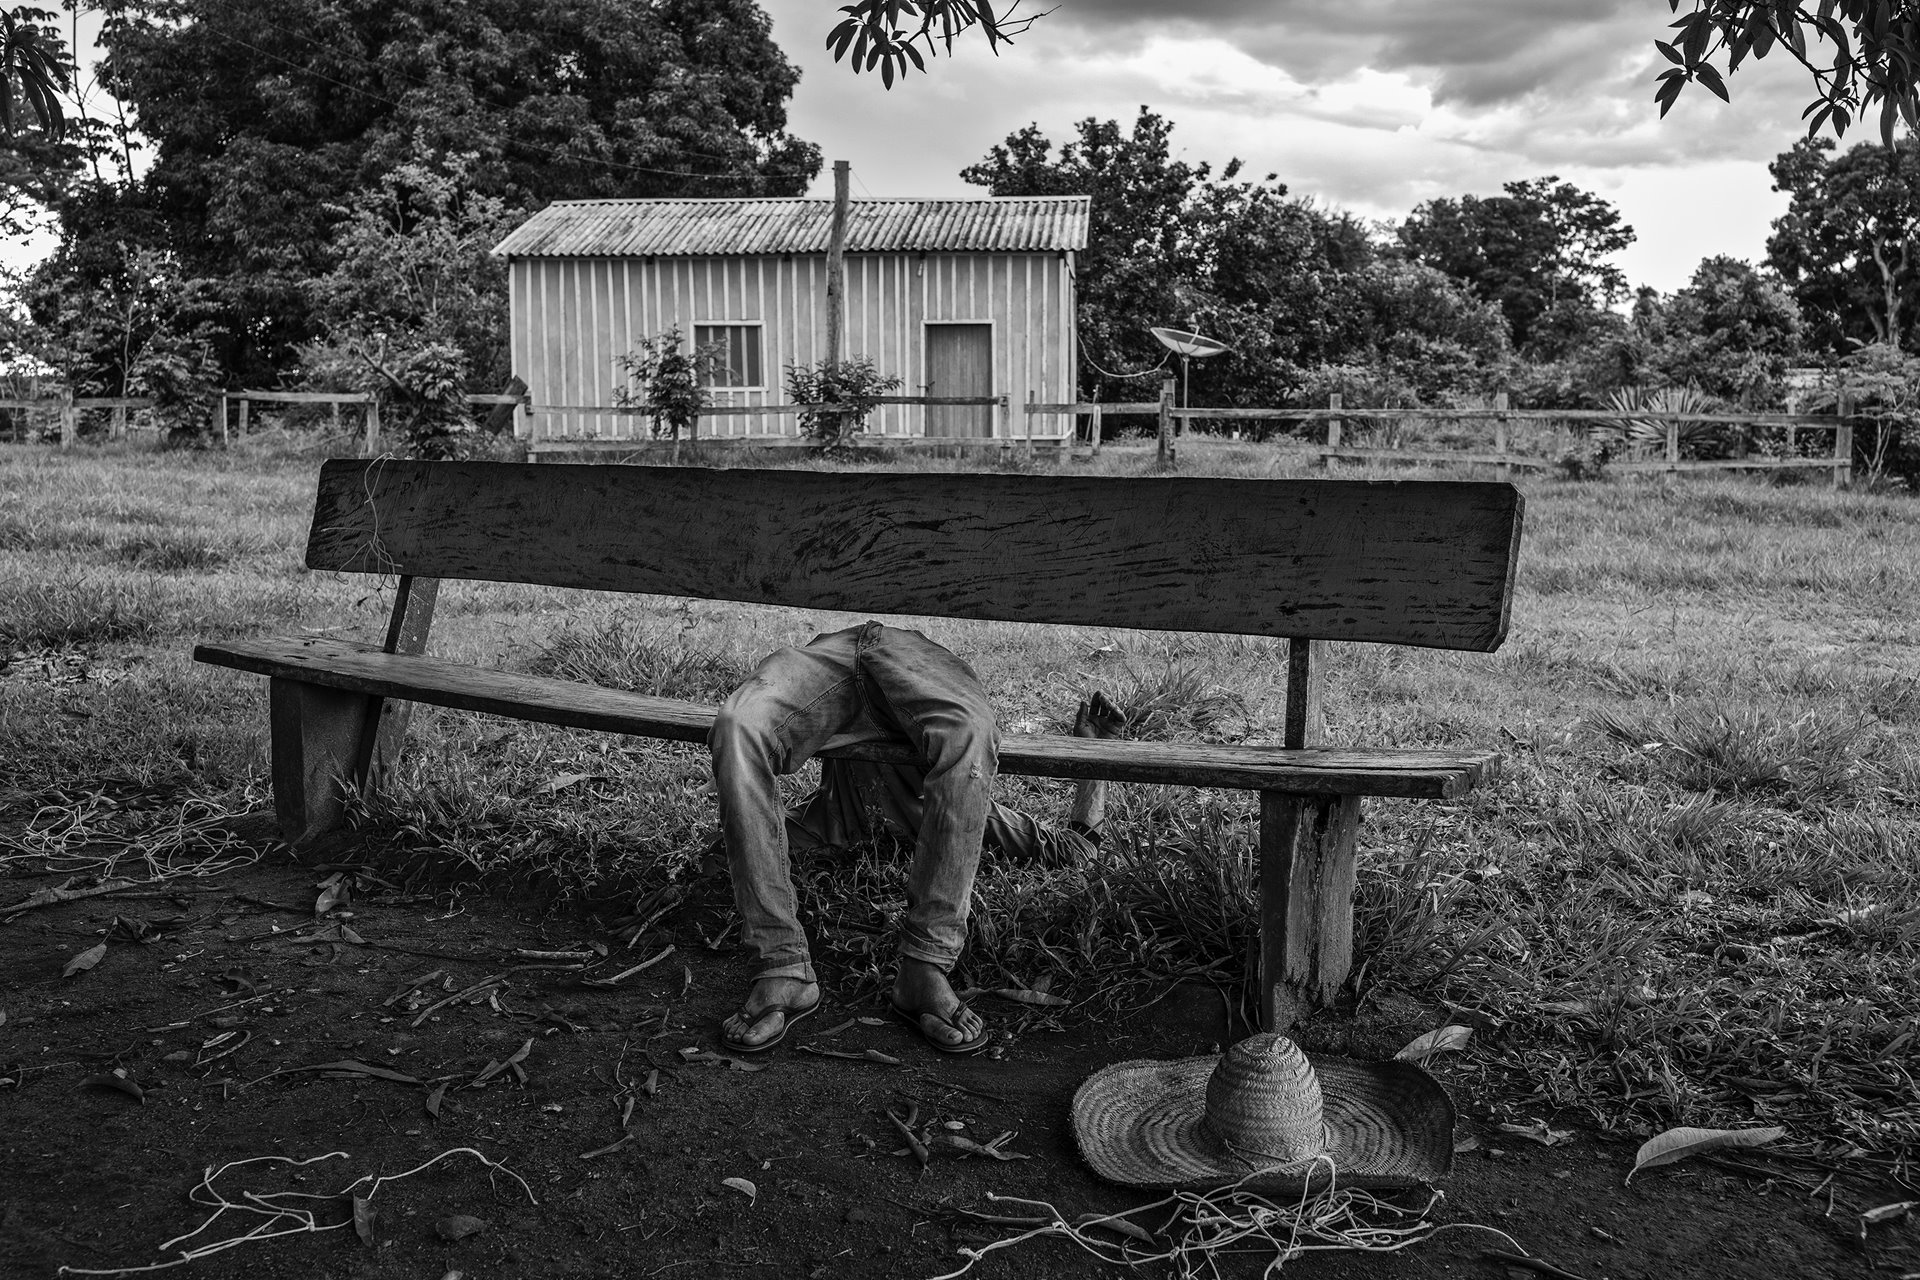 <p>A member of the Quilombola community &ndash;&ensp;an Afro-Brazilian community consisting of Black Brazilians, some of whom are descendants of enslaved peoples from the African continent &ndash; lies passed out drunk on a bench, in Pedras Negras, São Francisco do Guaporé, Rondônia, Brazil. The process of providing land deeds to communities started by former enslaved people was already slow before Jair Bolsonaro&#39;s election. It has now stalled completely, as a result of the president&rsquo;s resolve not to demarcate further land for such communities in the Amazon.</p>
